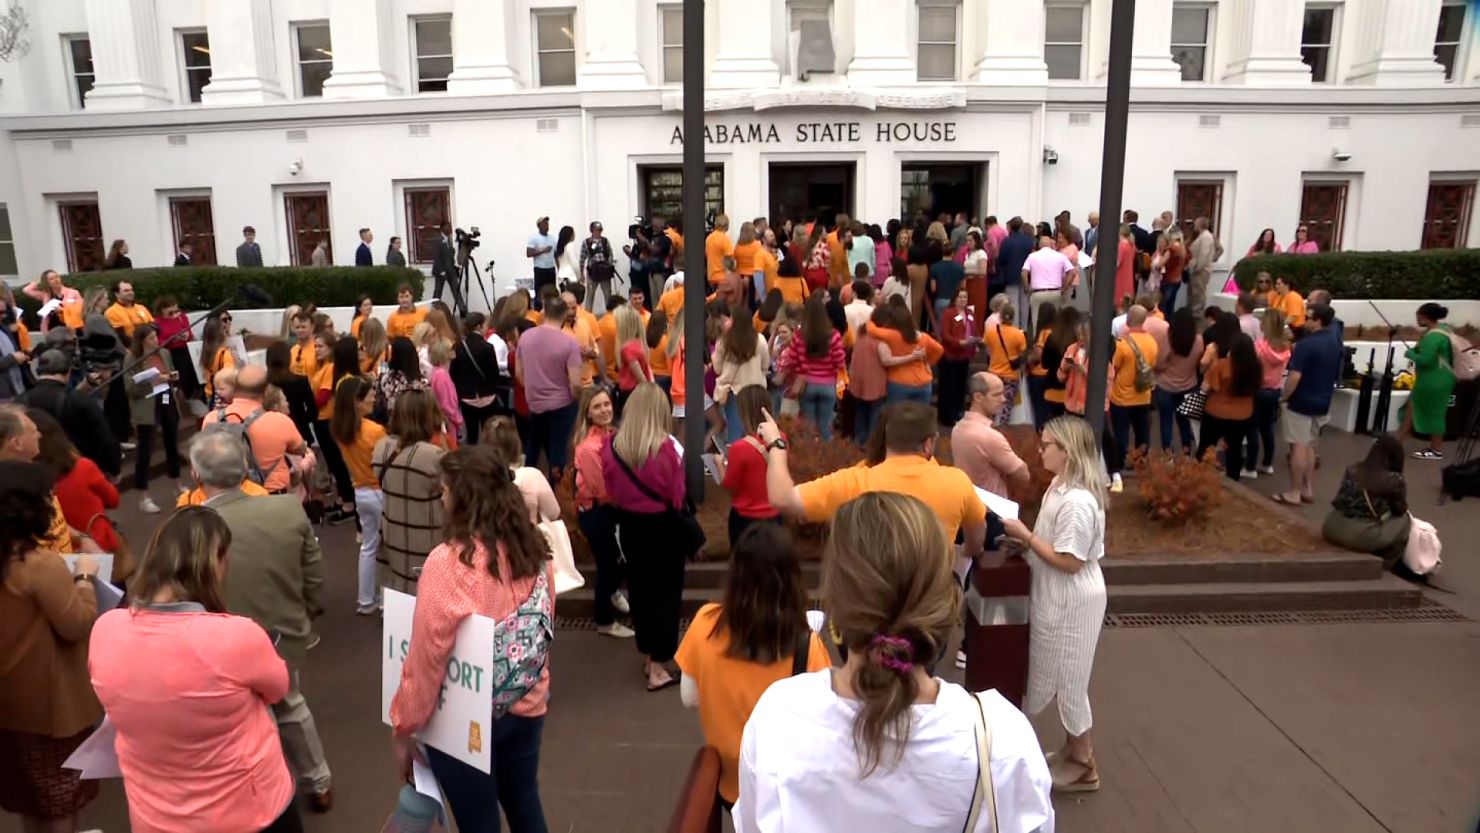 People gather outside the Alabama State House in Montgomery on Wednesday to call for access to IVF treatment.